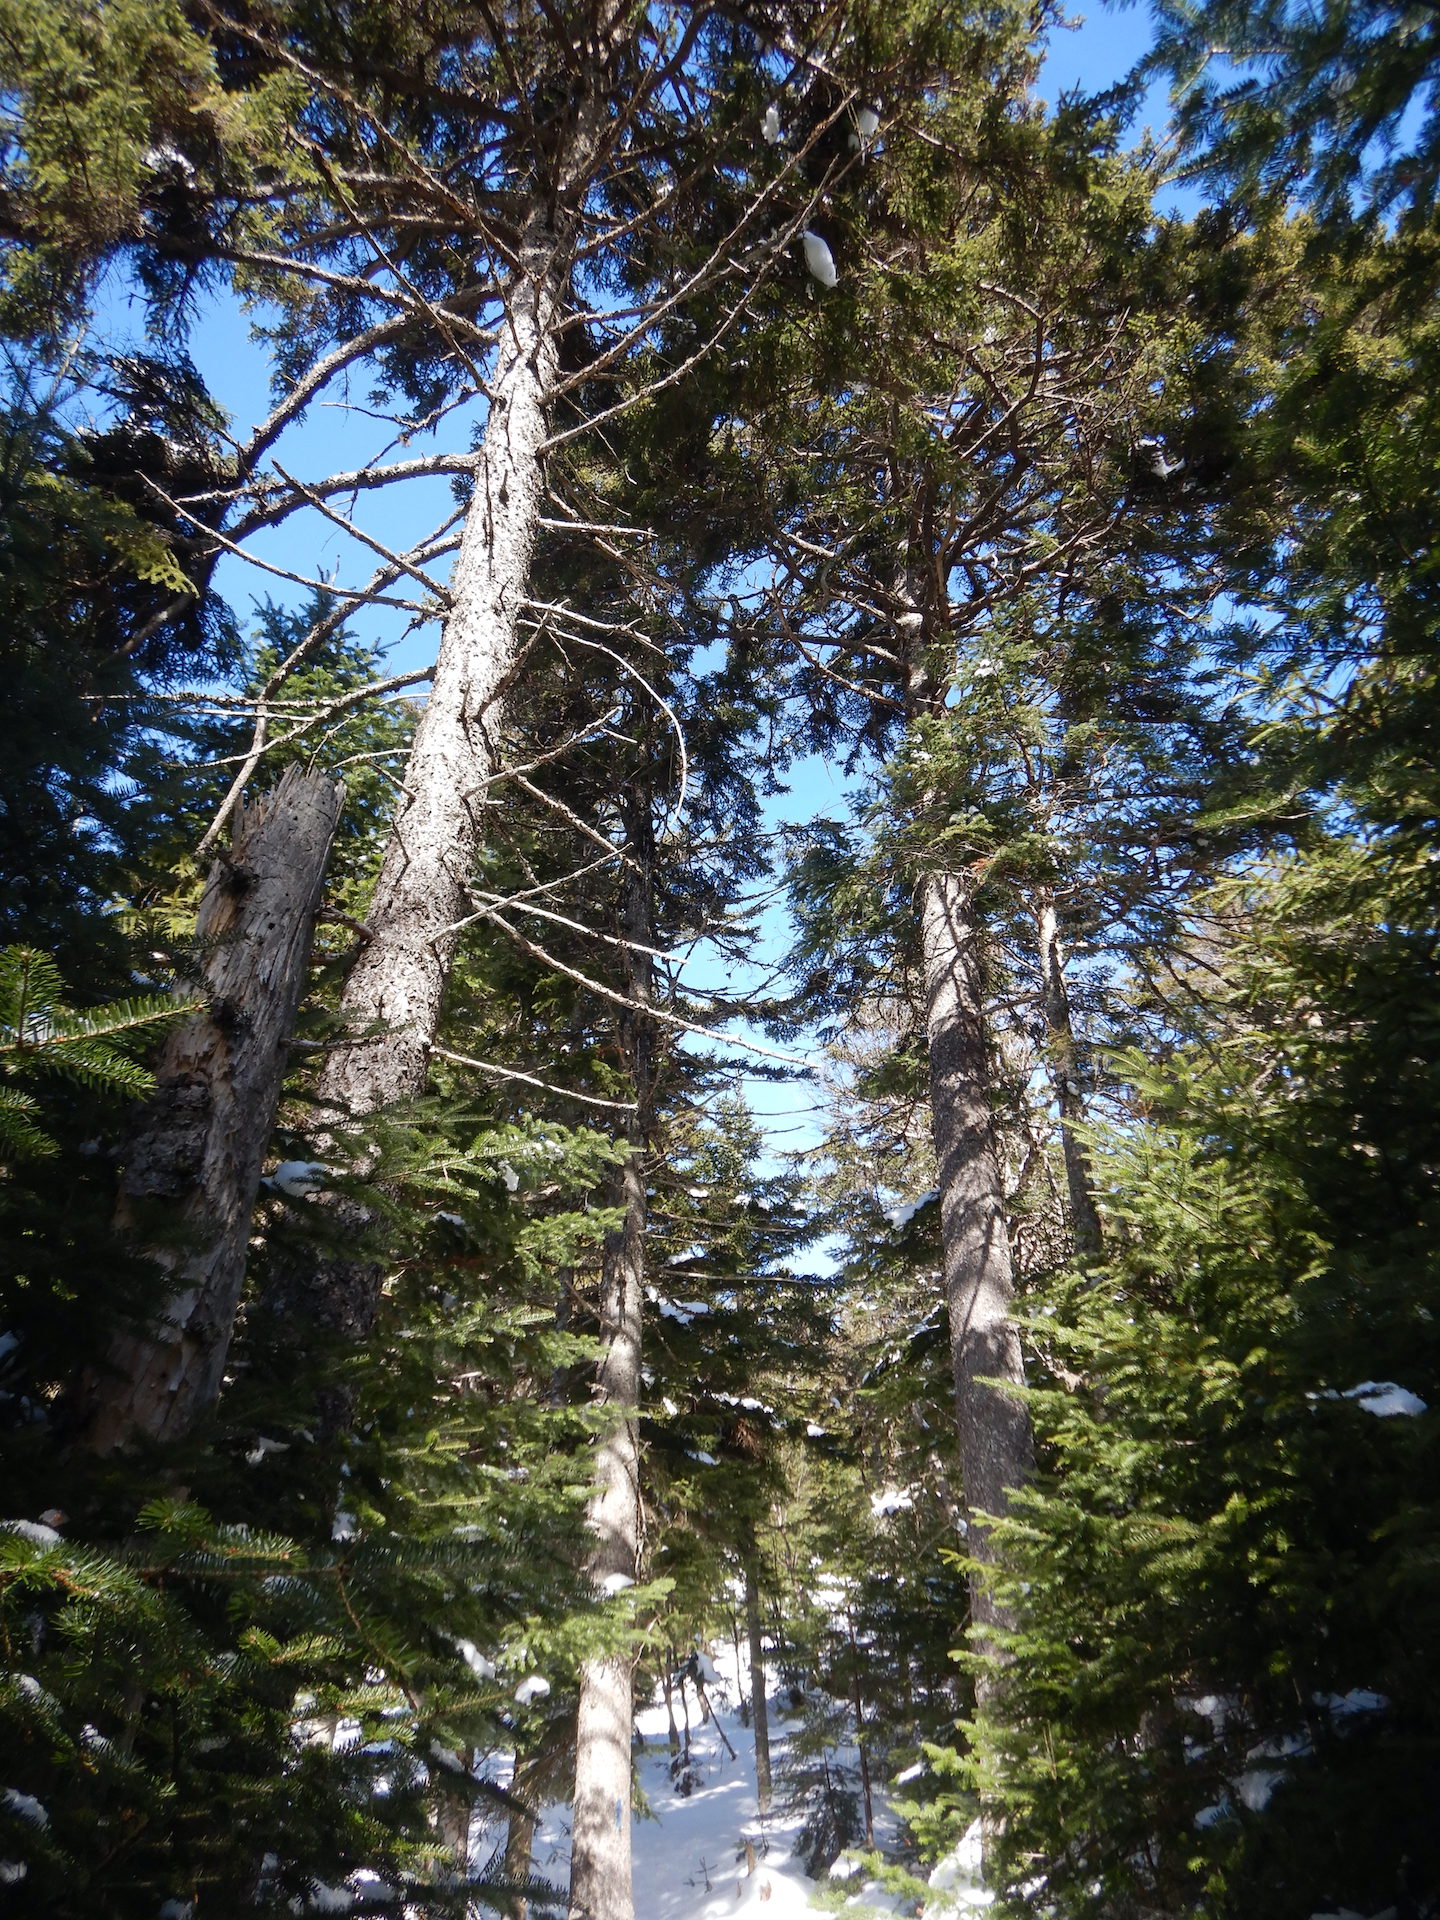 Portrait view of forest. Spruce and fir trees fill the scene with spruce growing the tallest. A narrow trail is visible at bottom center.